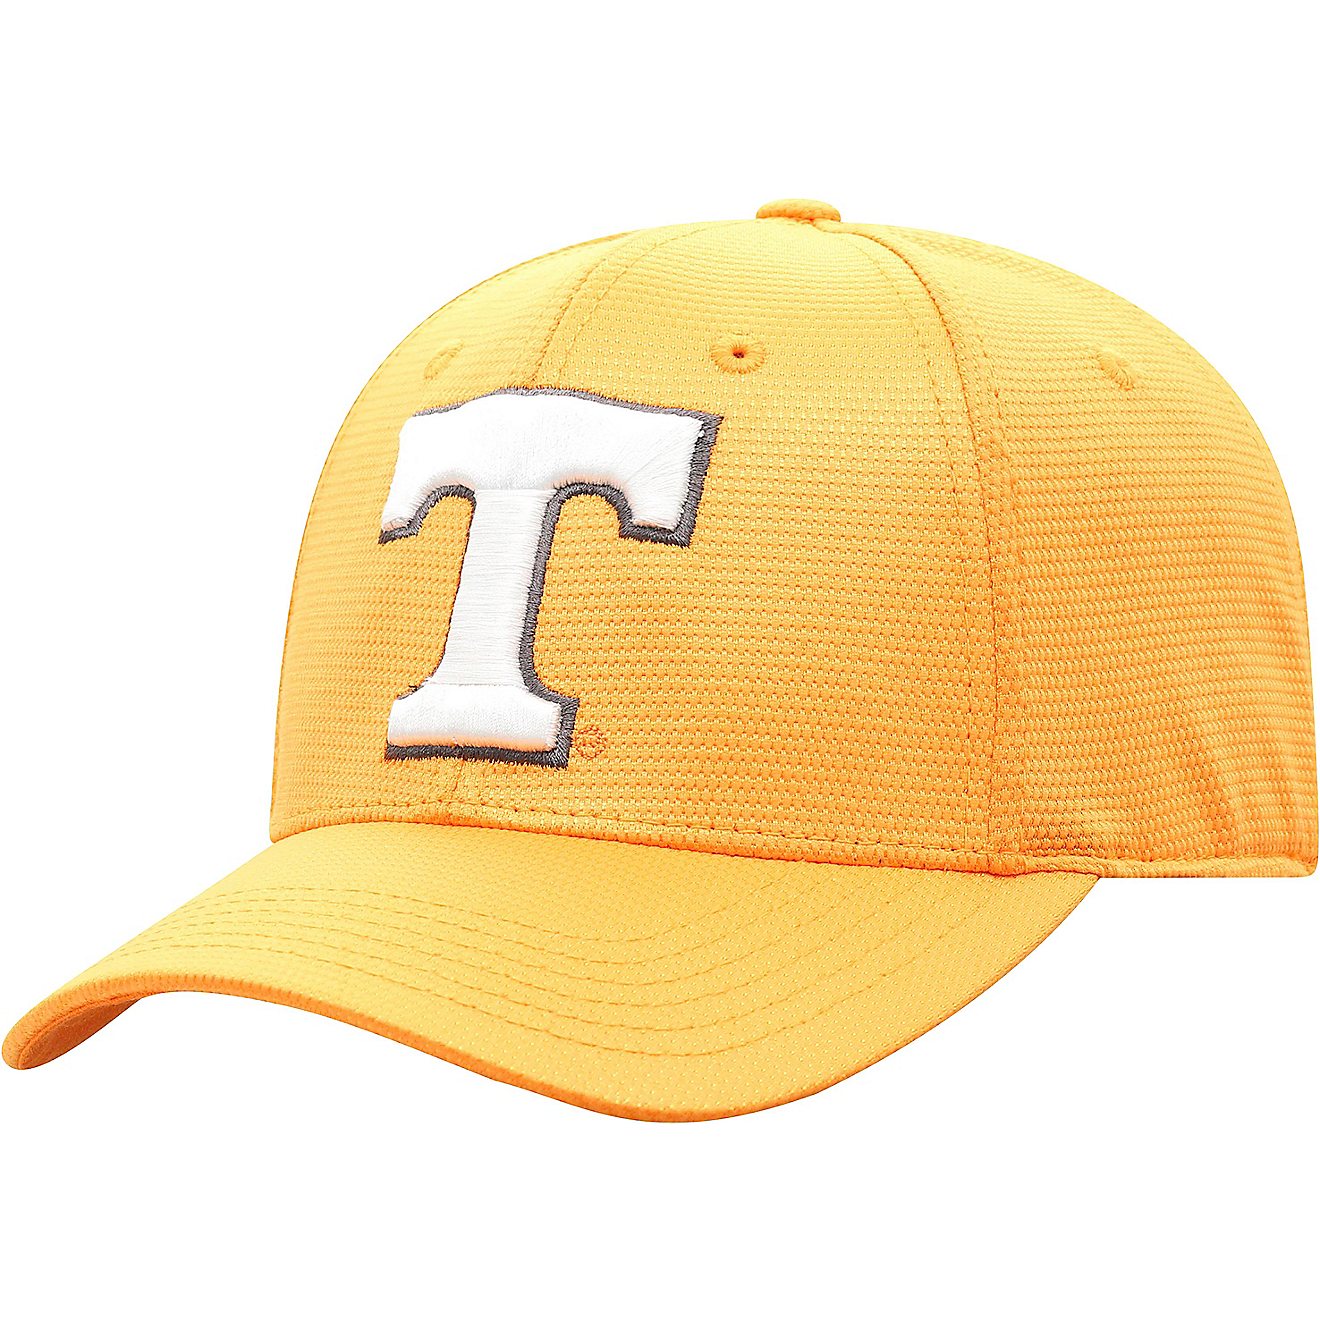 Top of the World Men's University of Tennessee Progo Cap                                                                         - view number 1